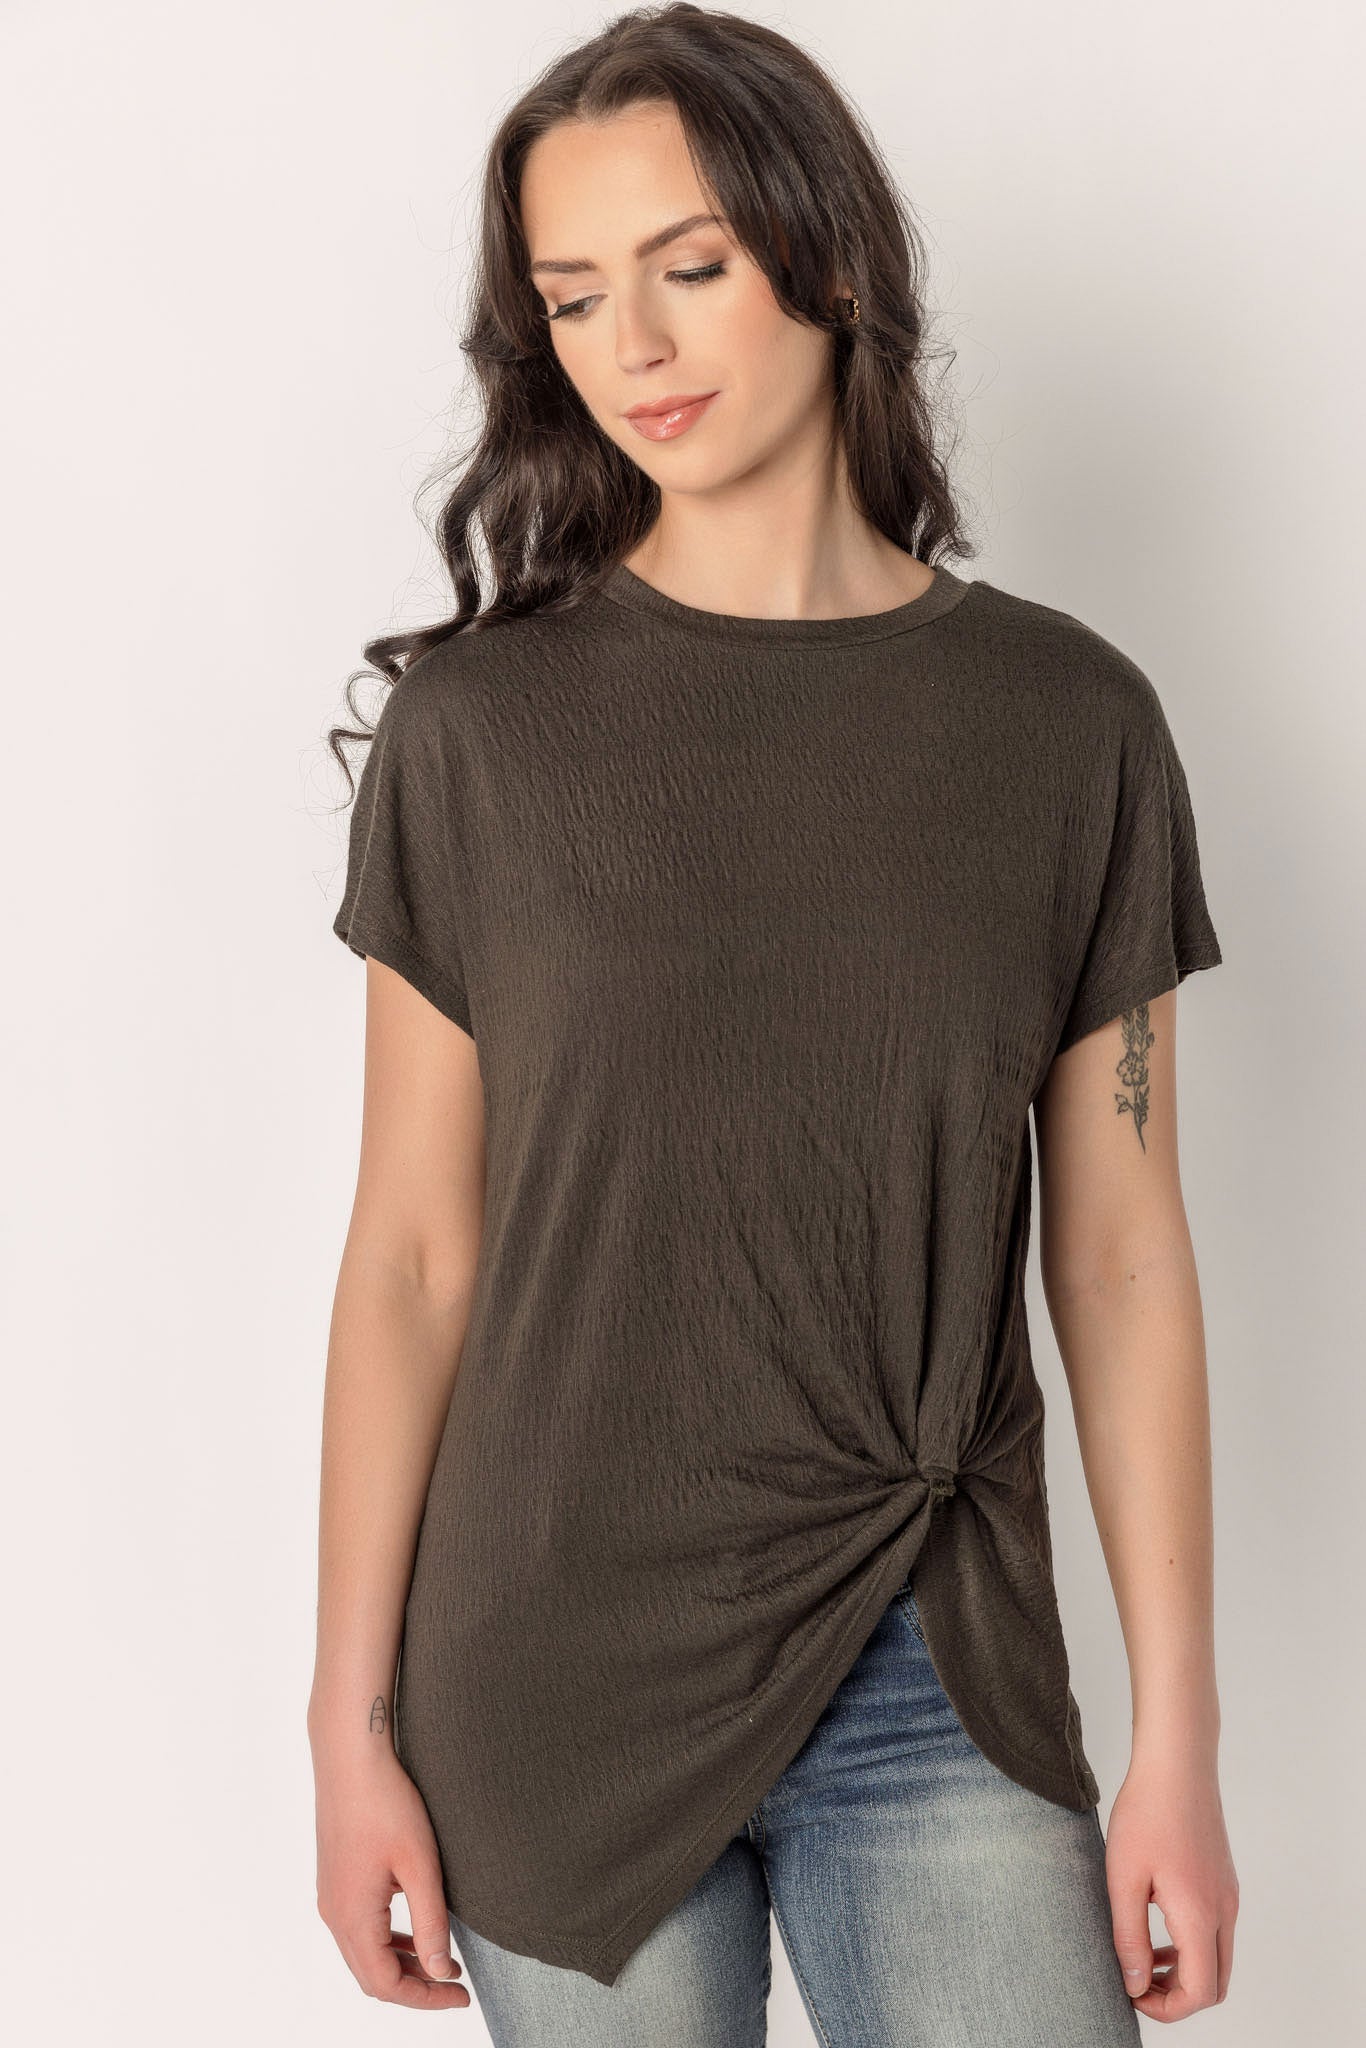 Textured Knit Tee with Knotted Hem